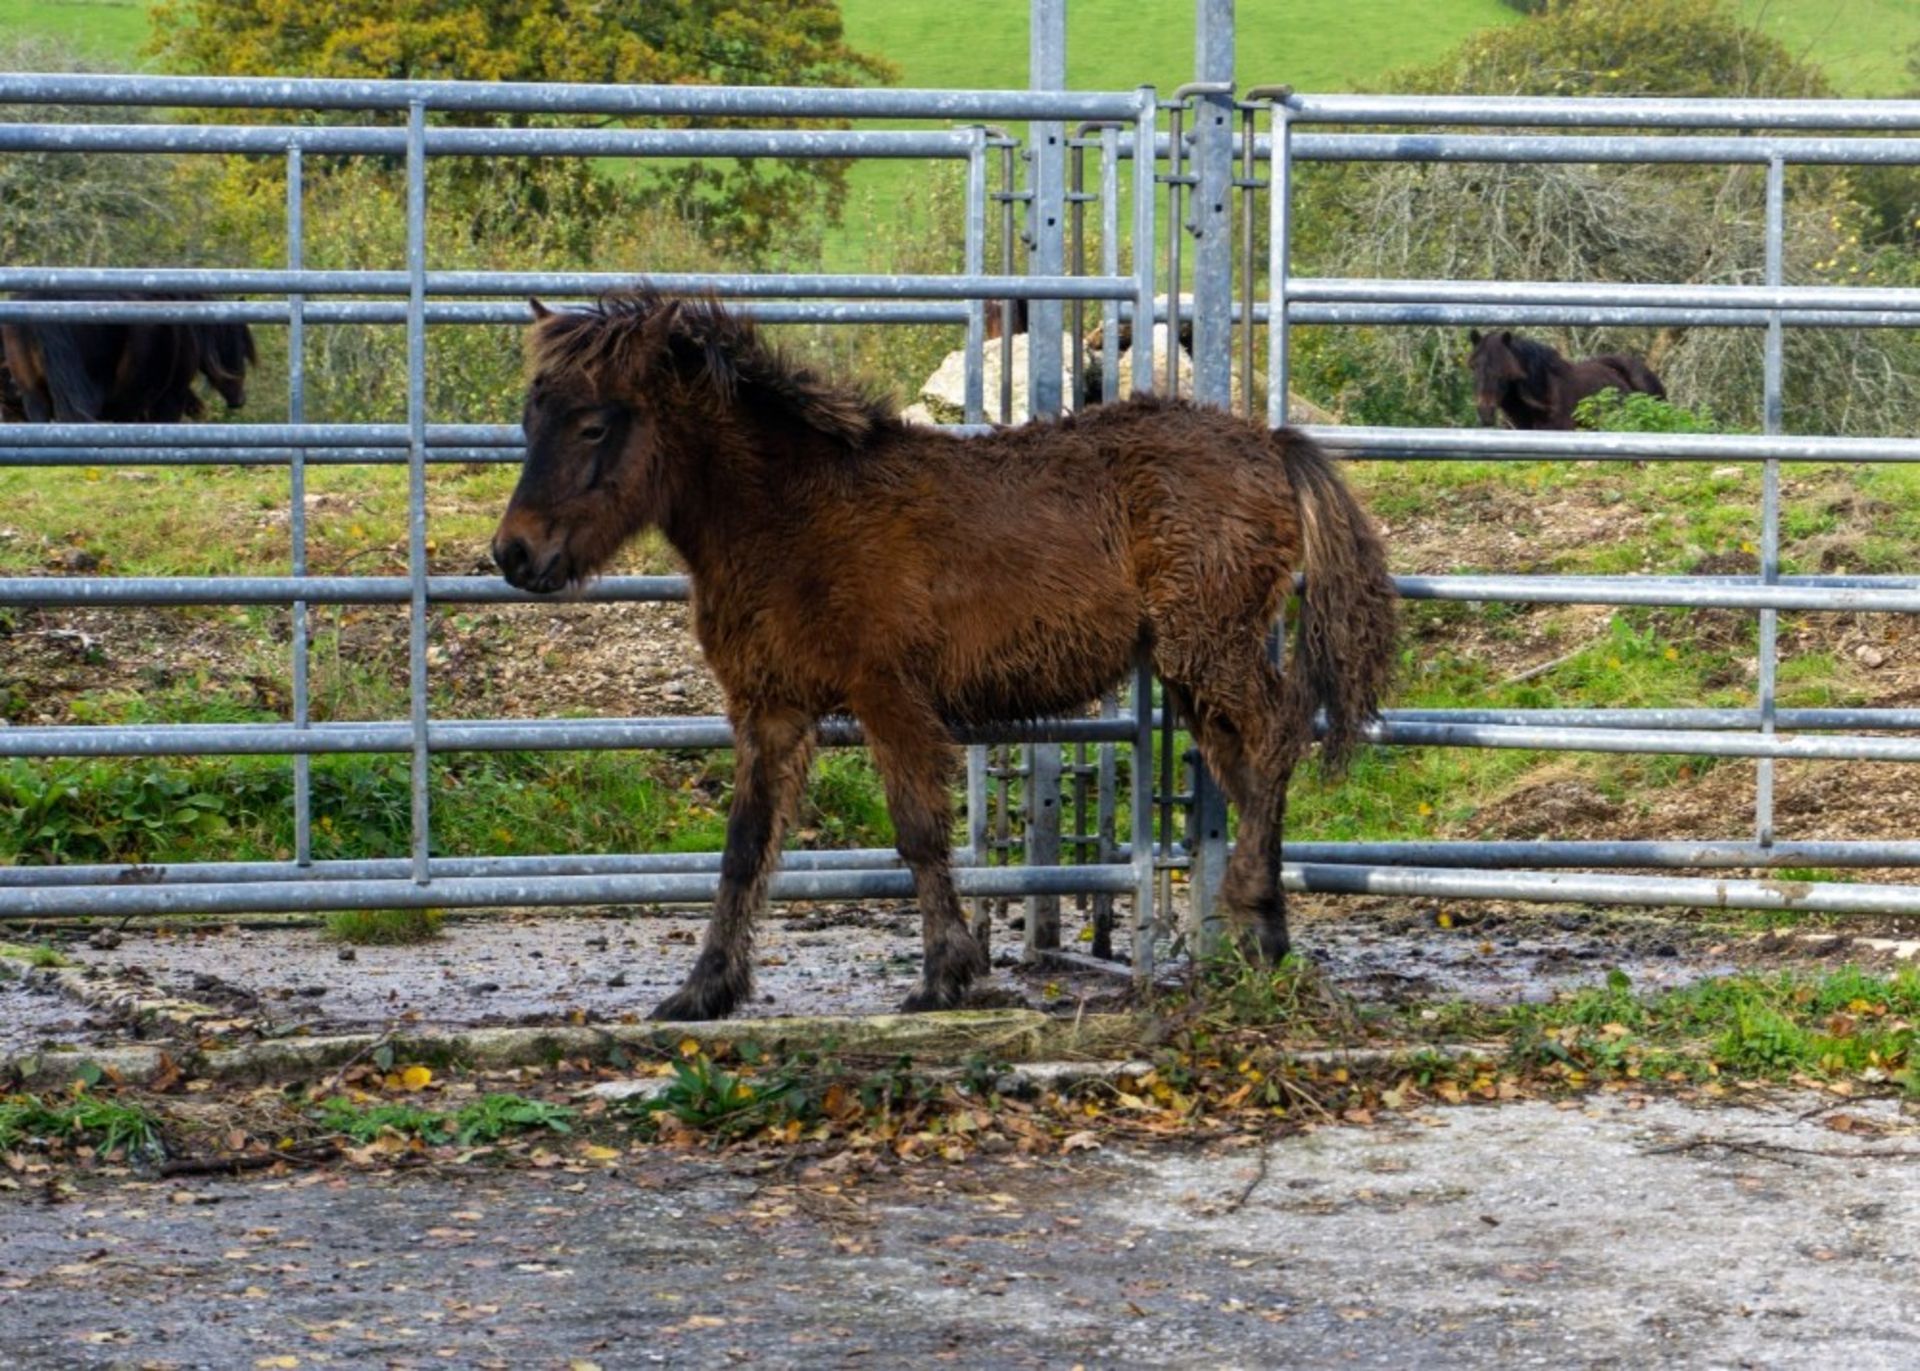 'CHINKWELL JAZZ'S LAD' DARTMOOR HILL PONY BAY COLT APPROX 6 MONTHS OLD